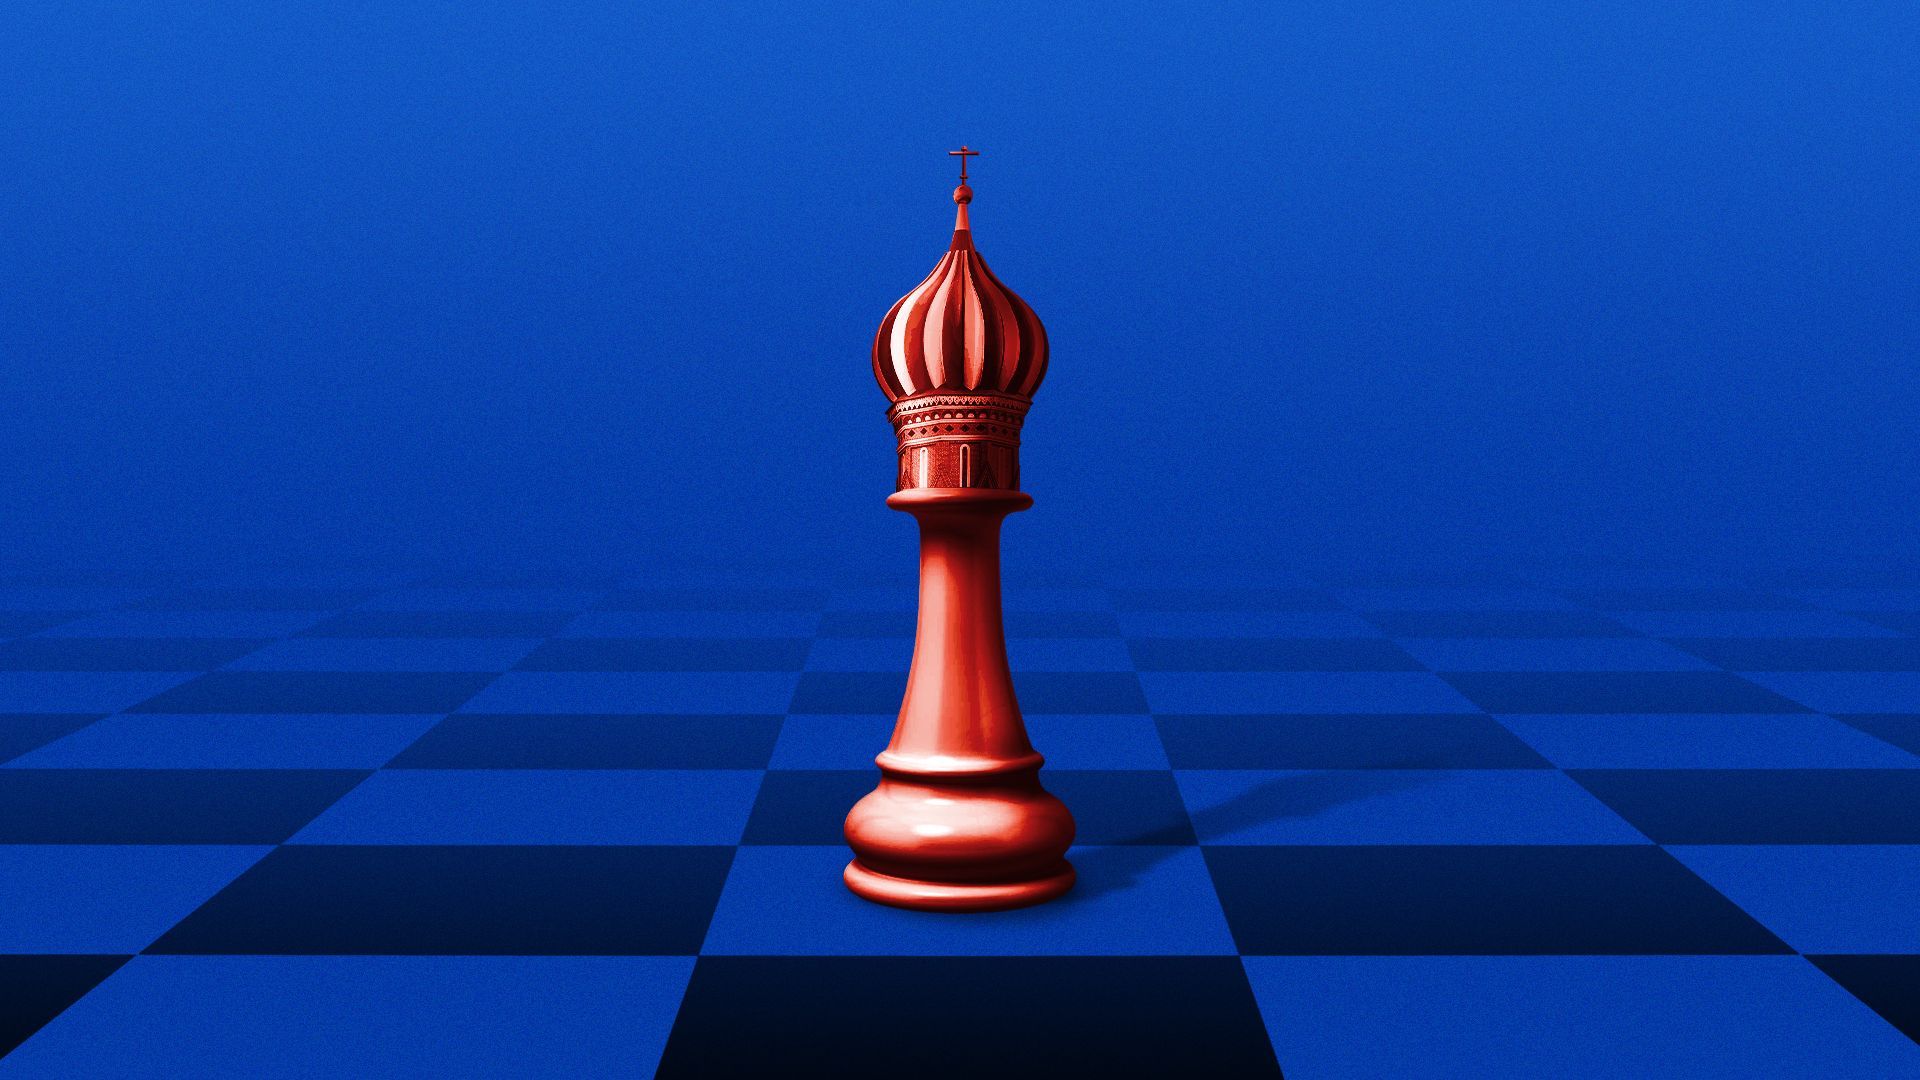 Illustration of a chess piece with the dome of St. Basils Cathedral as the top.